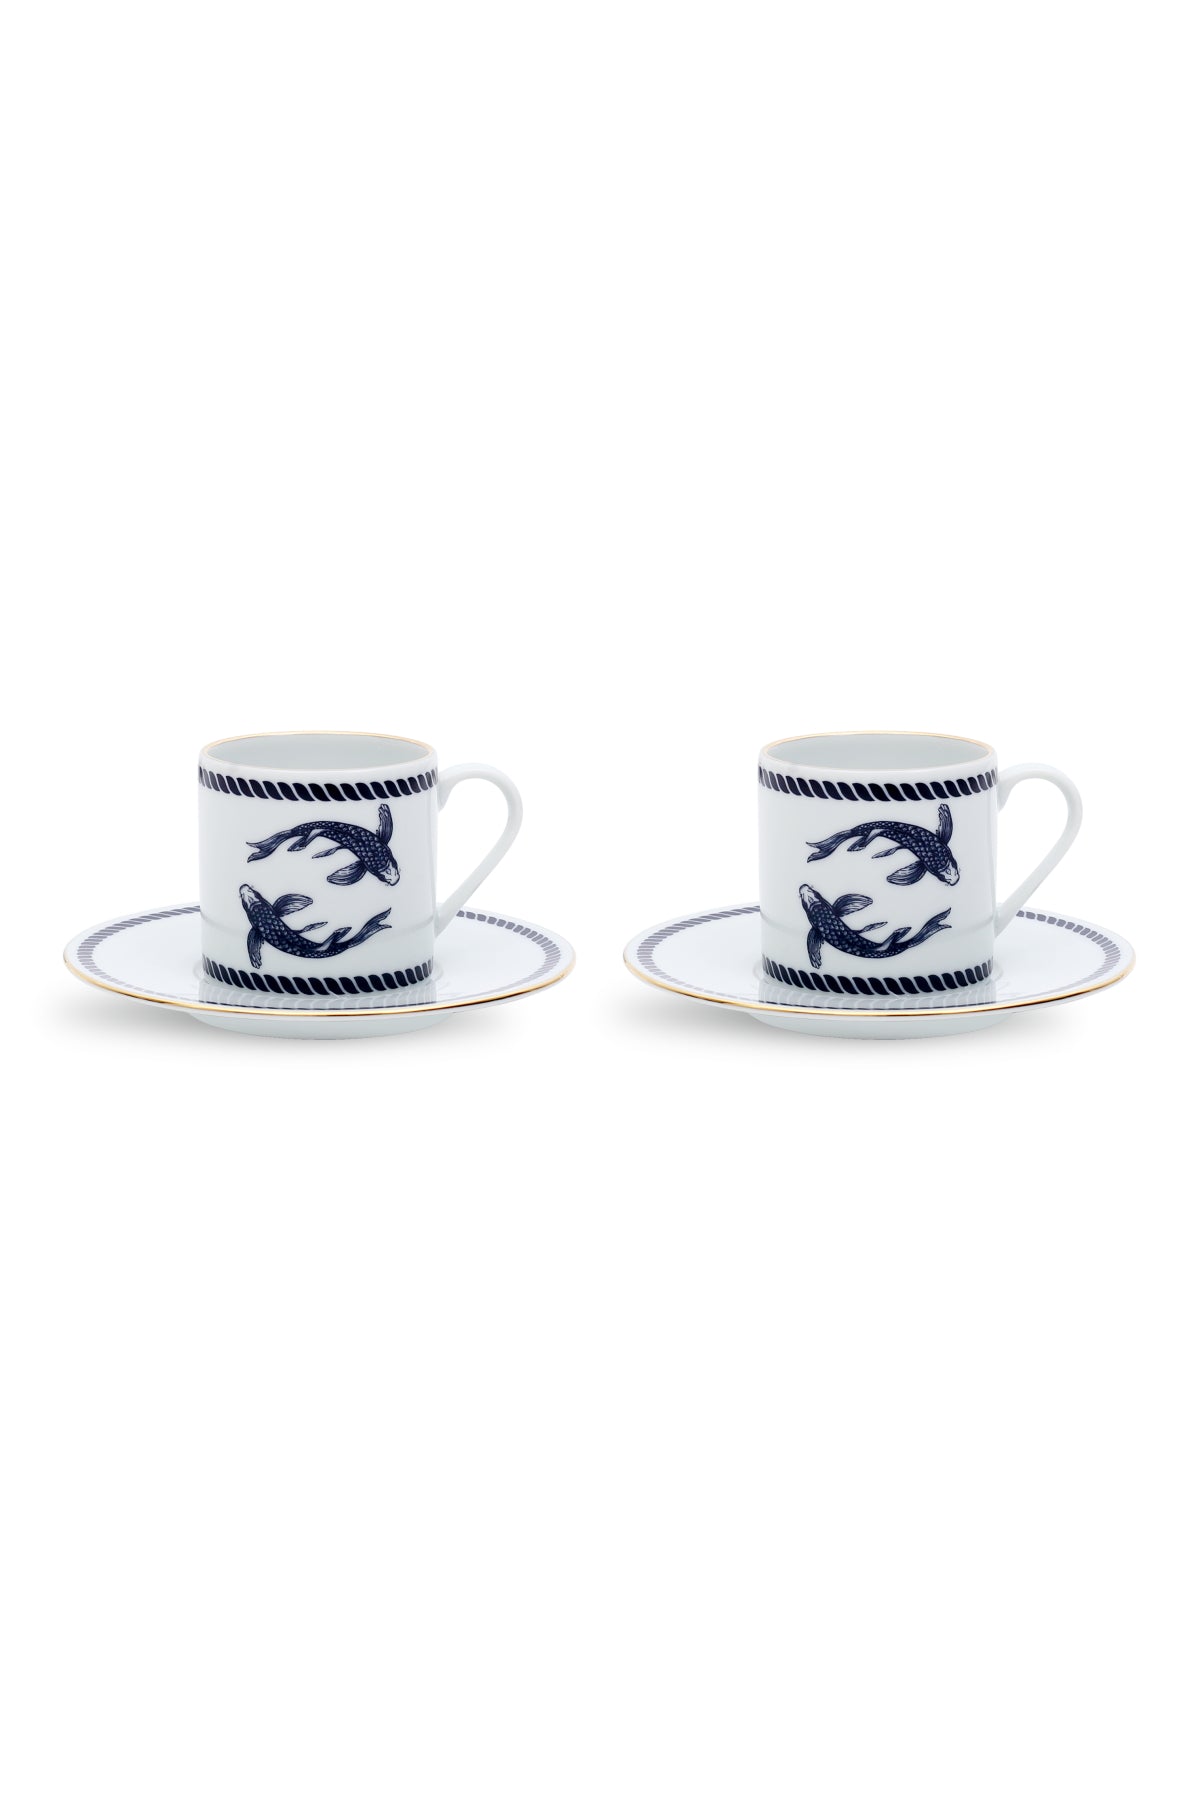 Legend Koi Collection - Set of 2 Turkish Coffee Cups